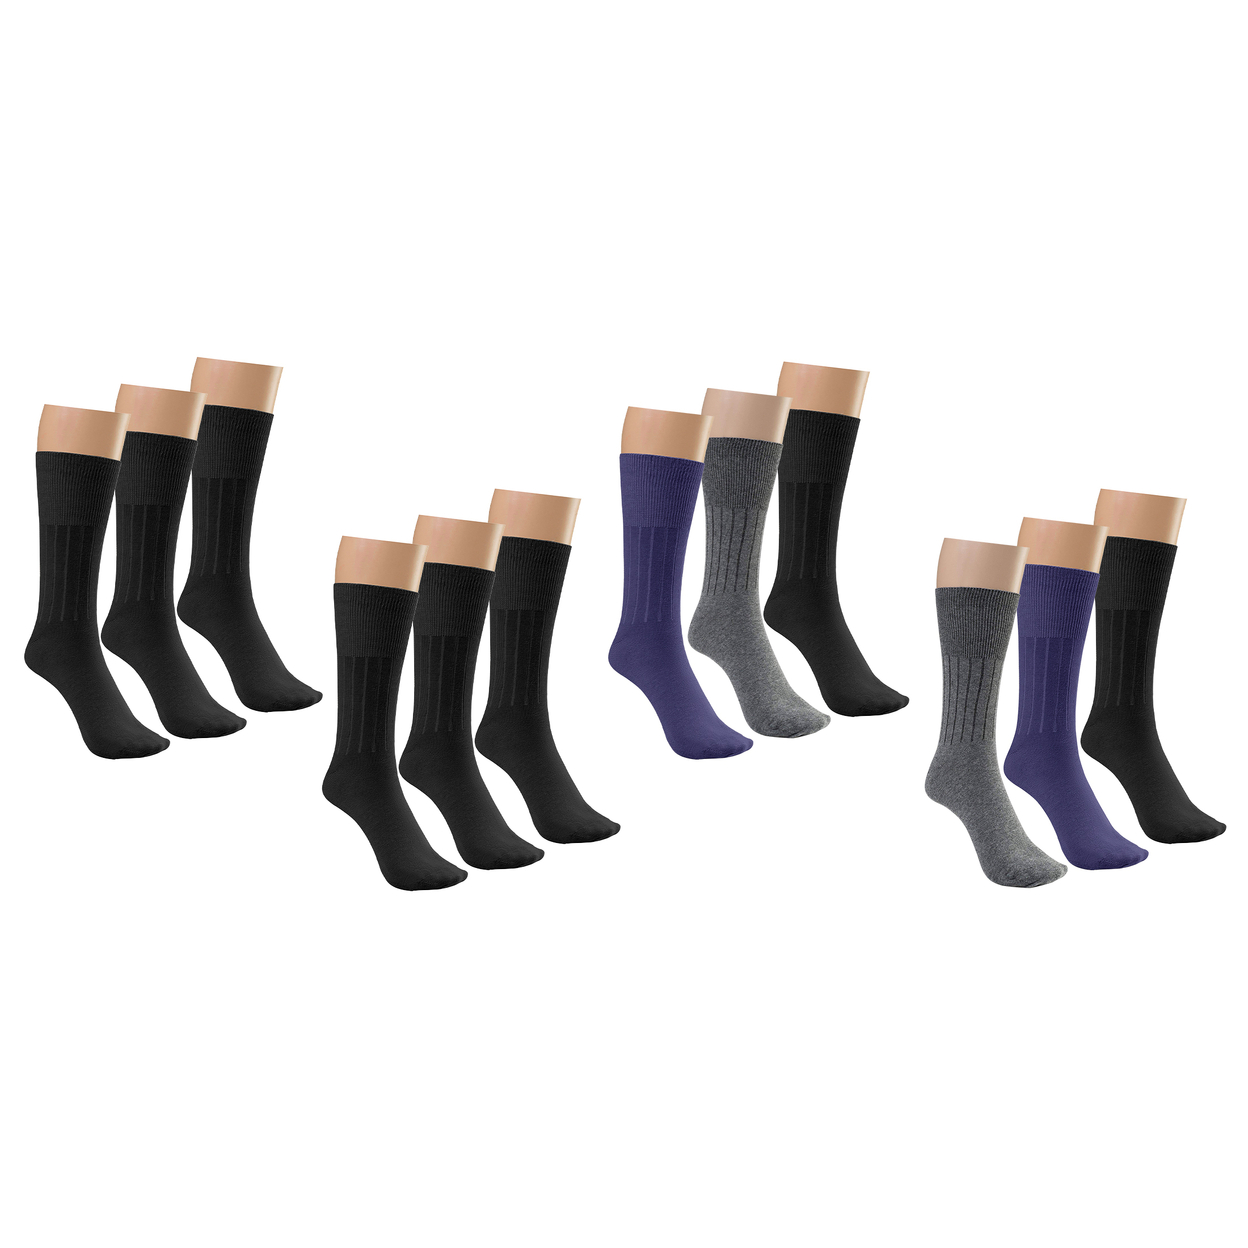 Multi-Pairs: Physician Approved Non-Binding Diabetic Circulatory Comfortable Moisture Wicking Dress Socks - 3-pairs, Assorted